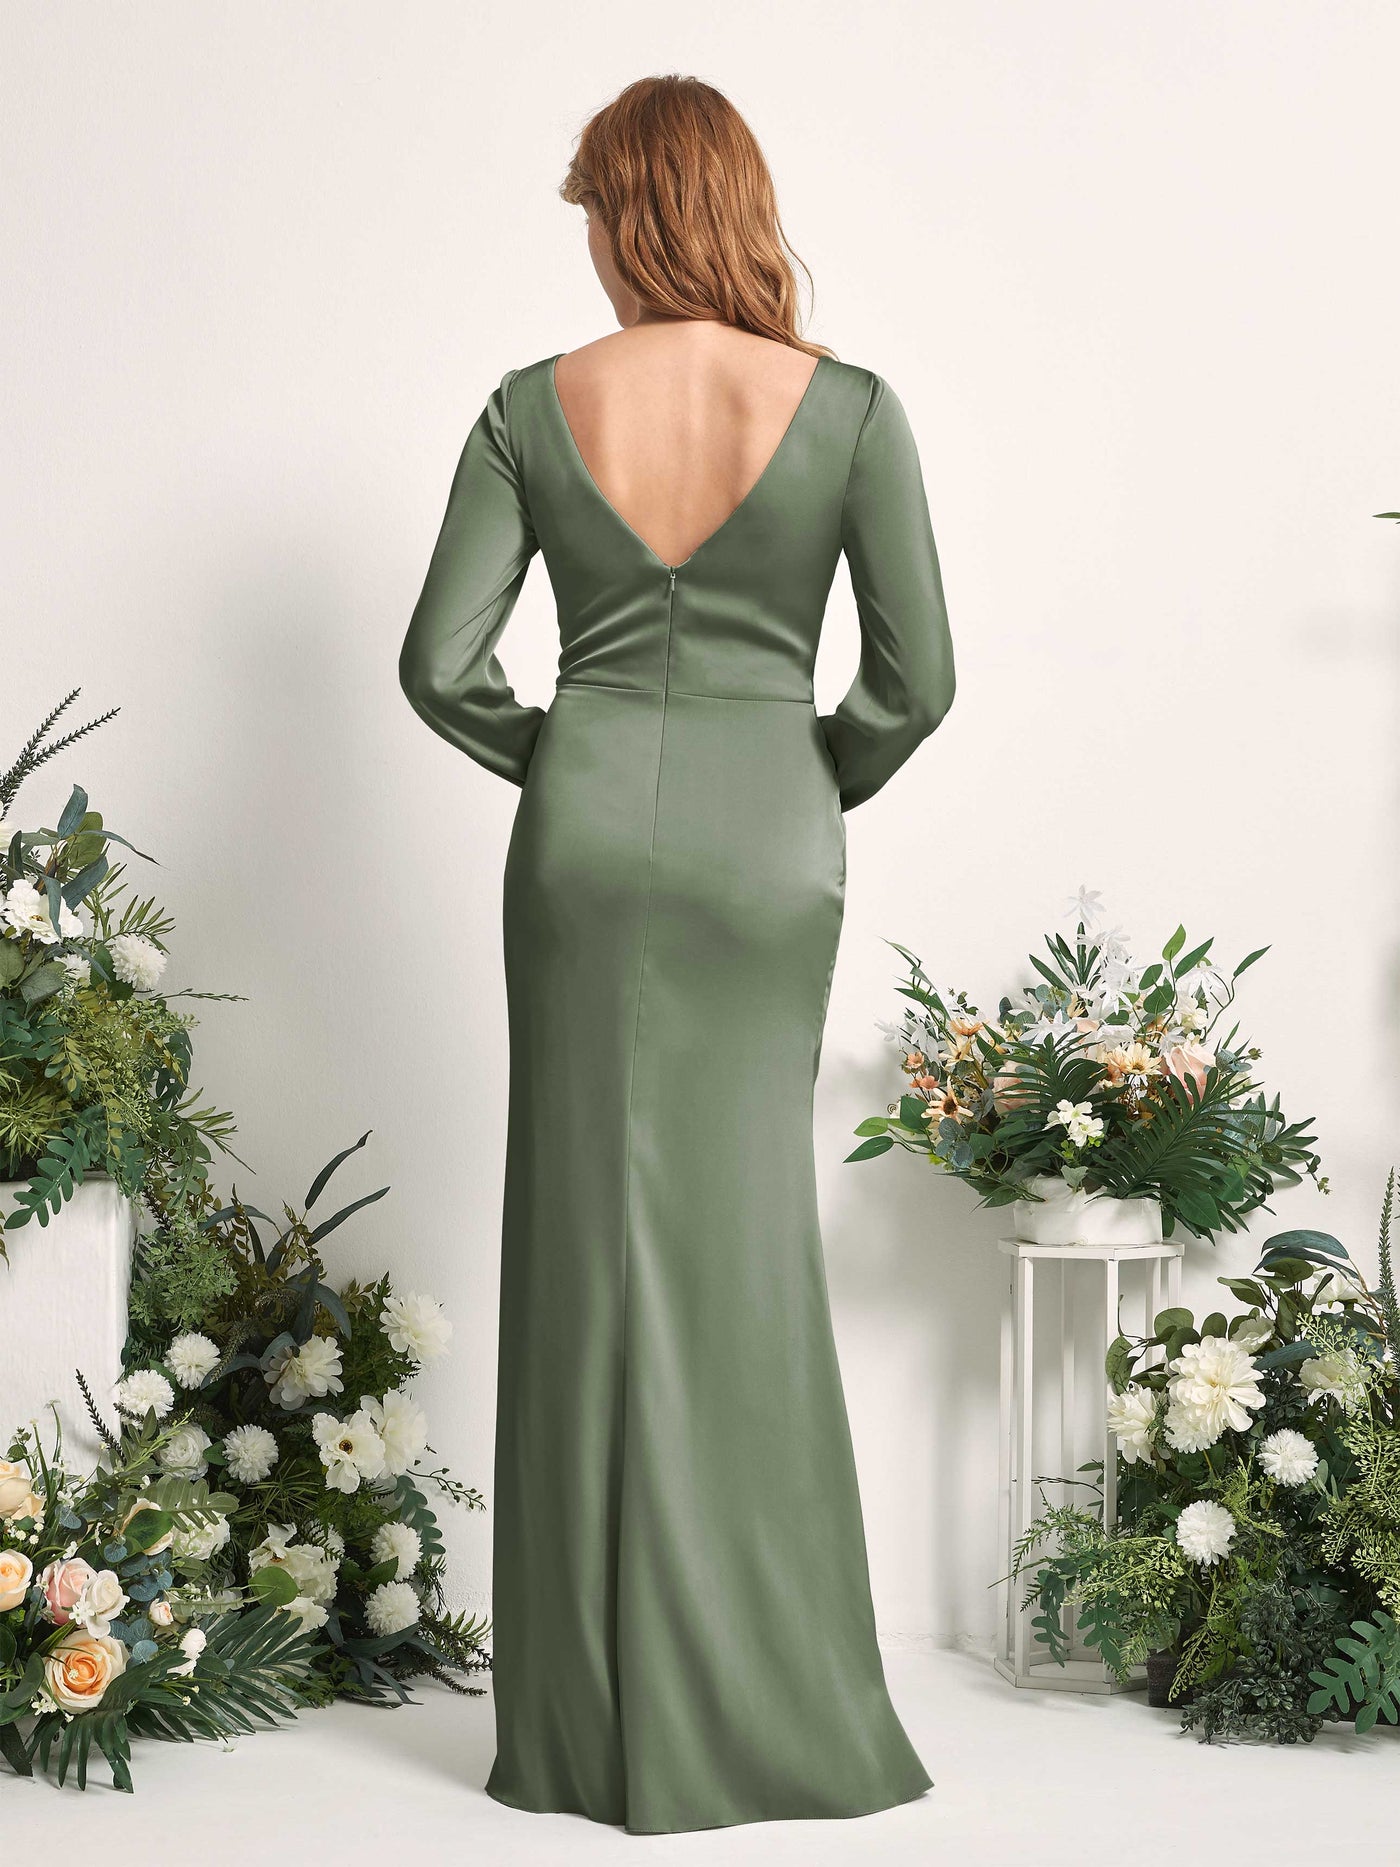 Green Olive Bridesmaid Dresses Bridesmaid Dress Ball Gown Satin V-neck Full Length Long Sleeves Wedding Party Dress (80225170)#color_green-olive